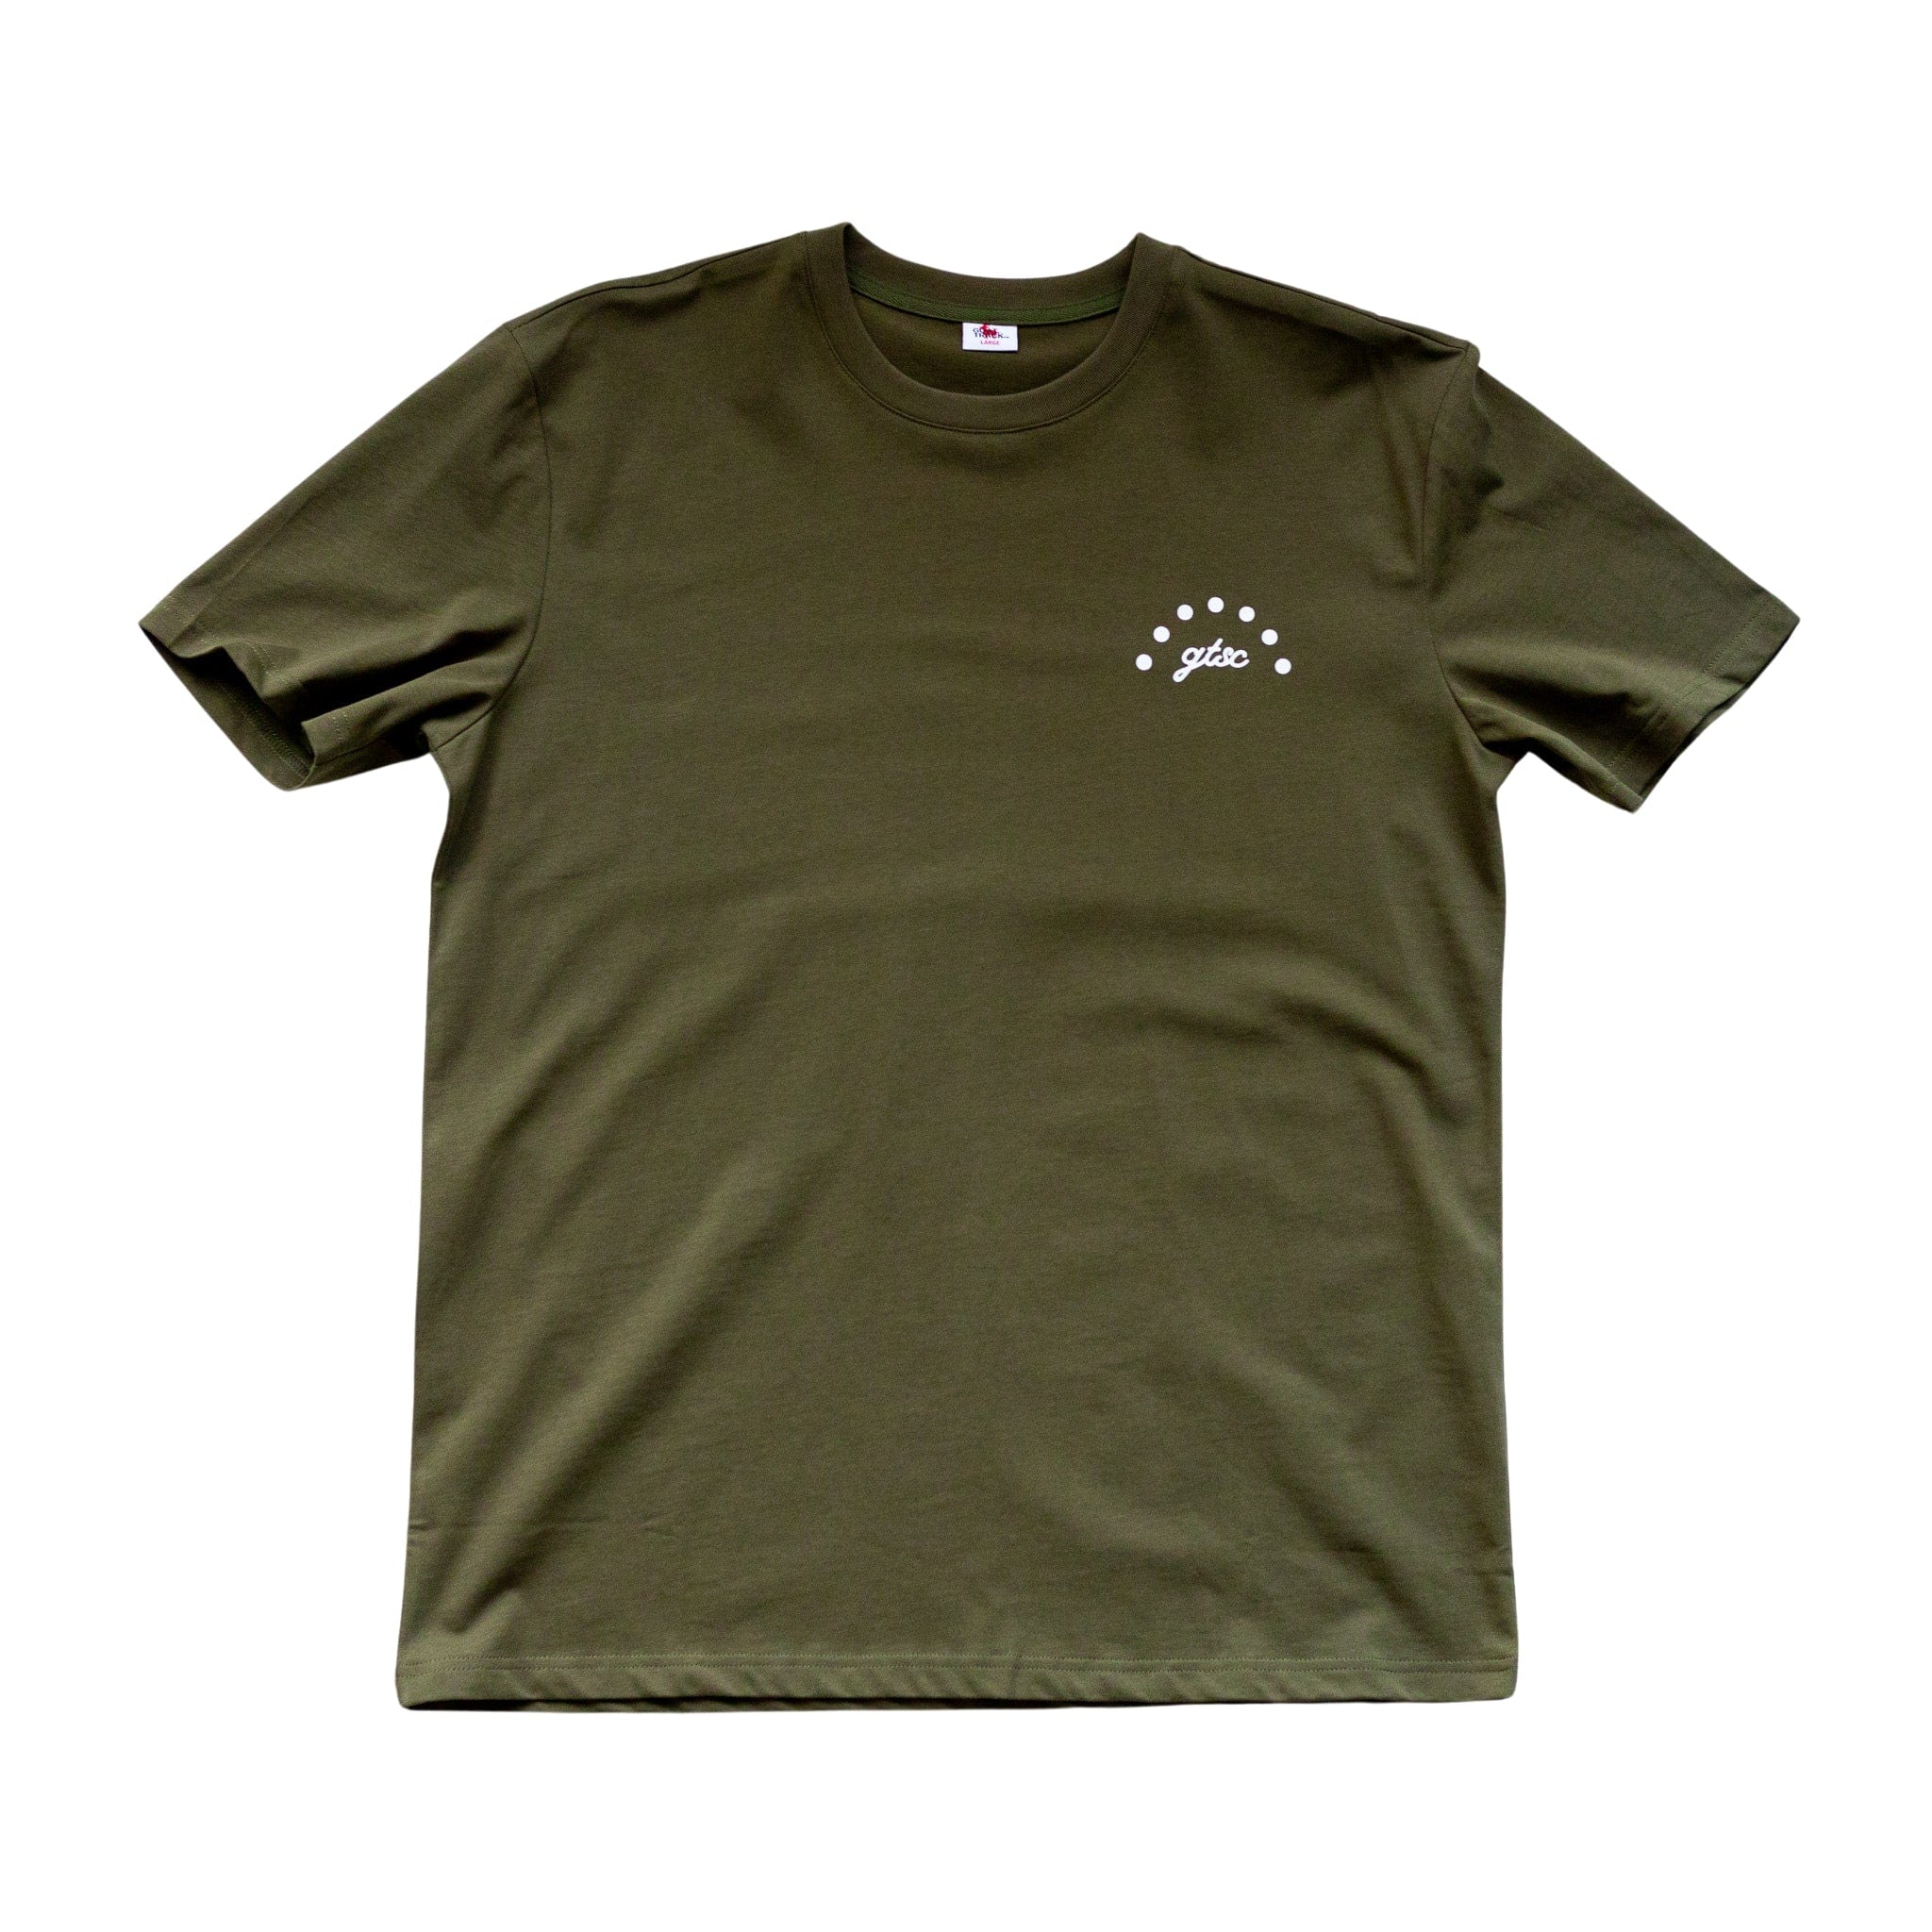 GT Crown Tee Shirts Canada-Golf-Lifestyle-Clothing-Brand